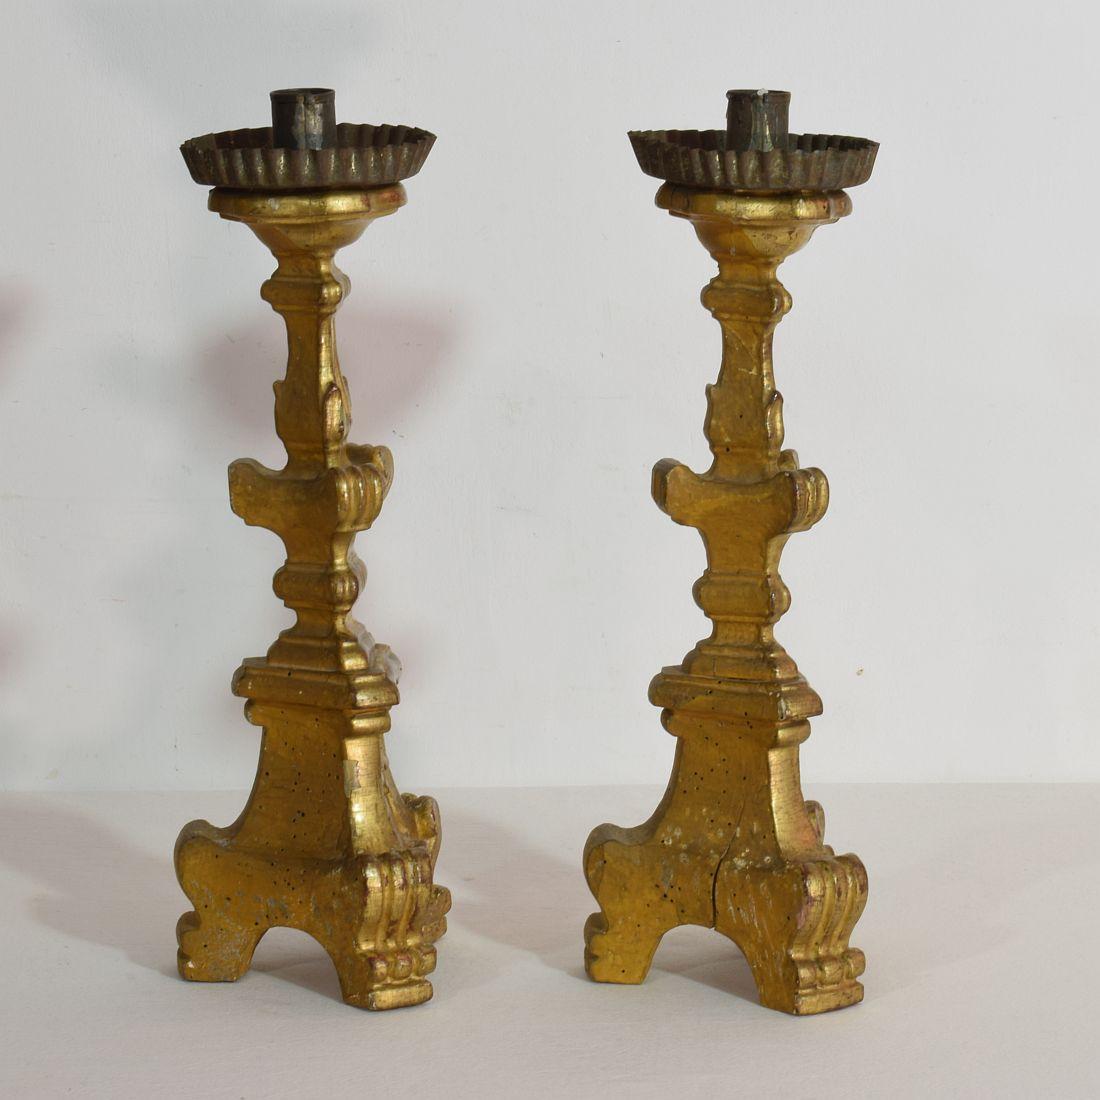 Wood Pair of 18th Century Italian Giltwood Baroque Candlesticks or Candleholders